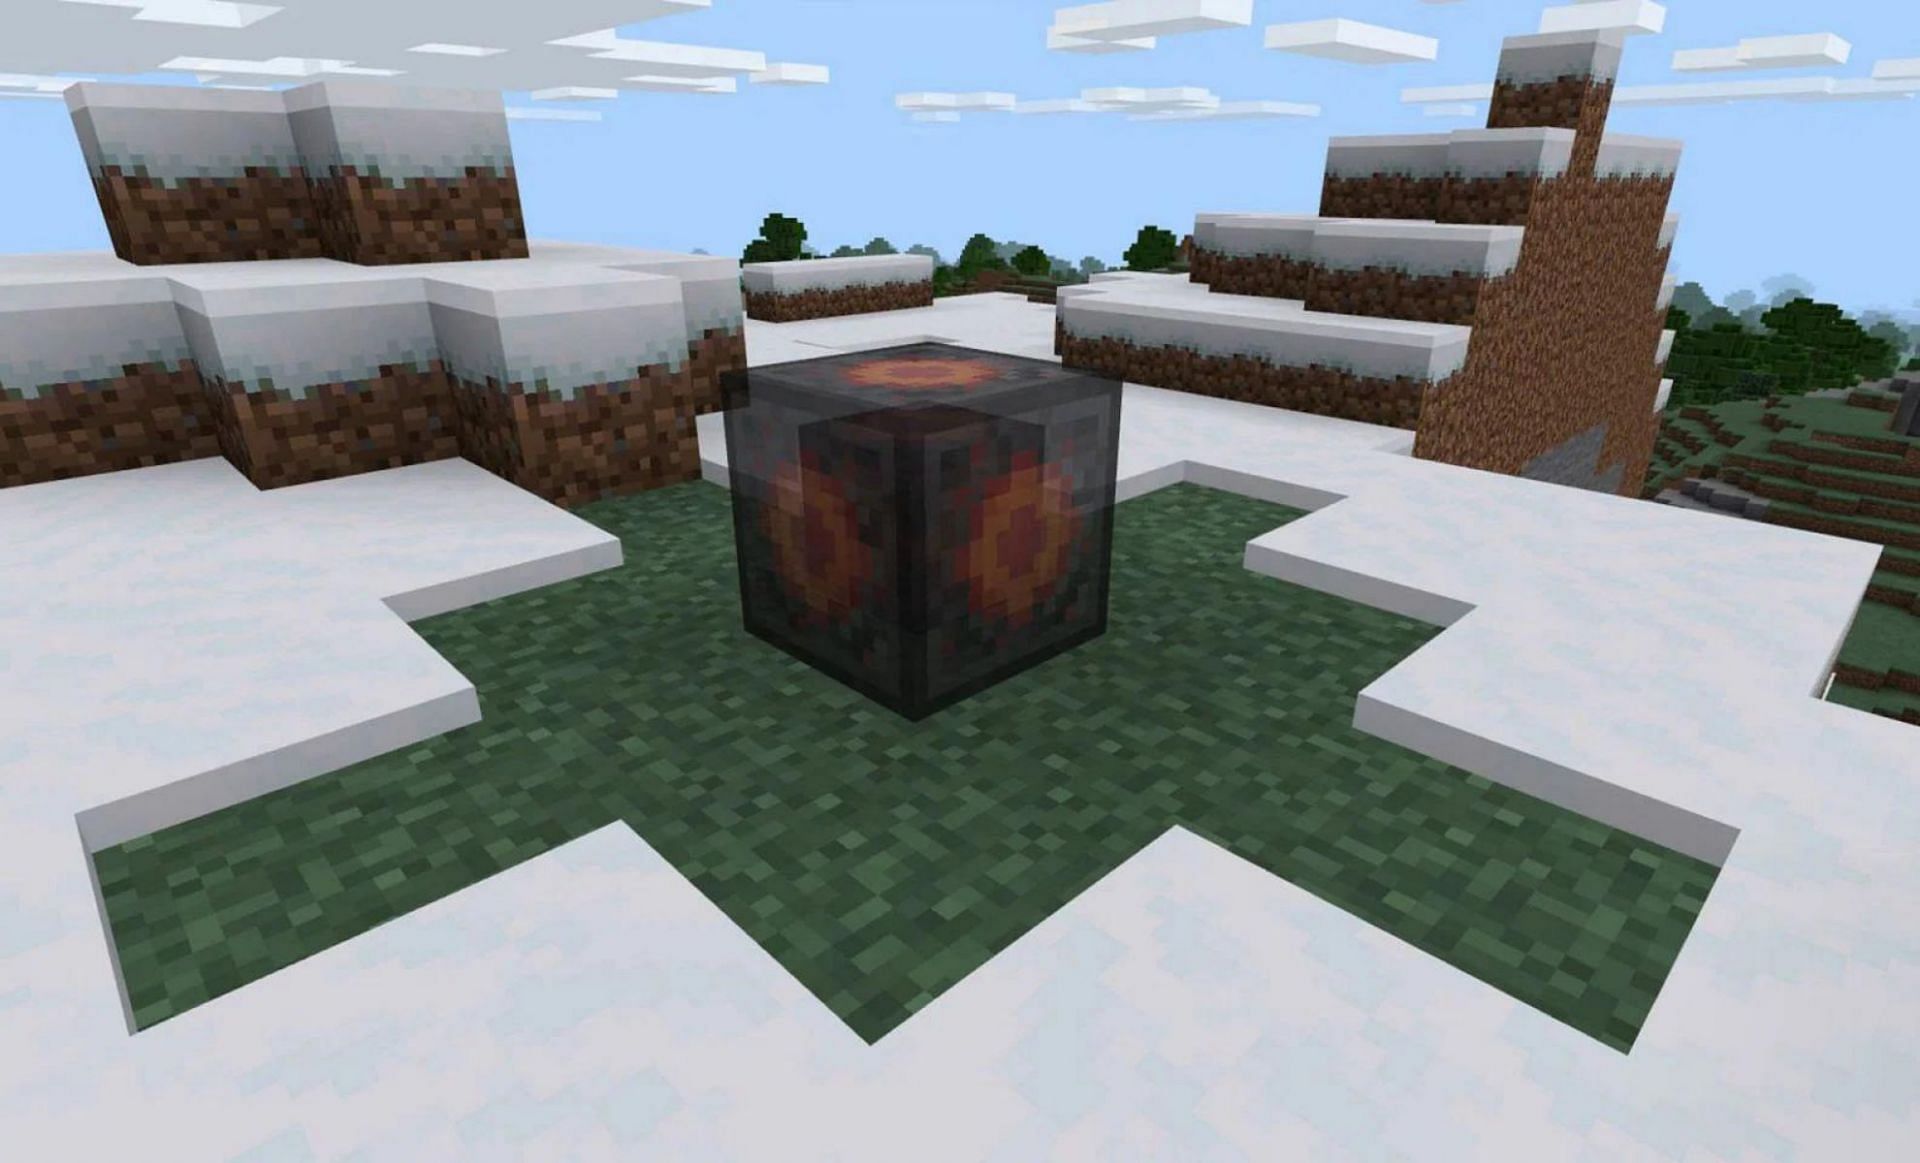 How the heat block functions in Education Edition (Image via Mojang)